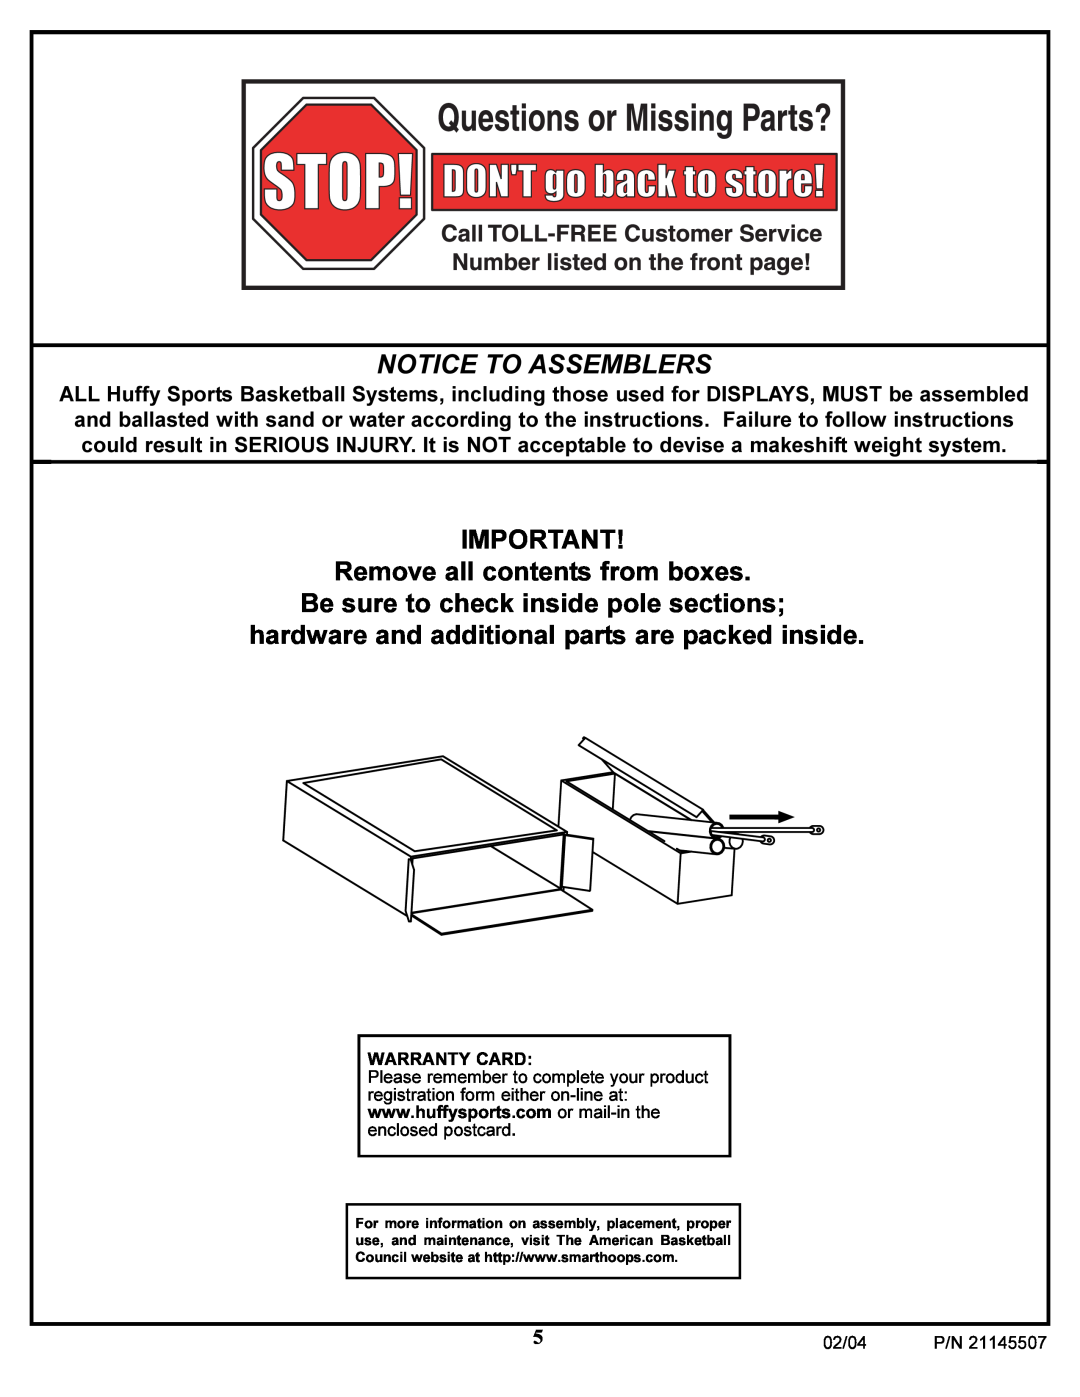 Huffy Sports Basketball Systems manual Notice To Assemblers, Remove all contents from boxes 